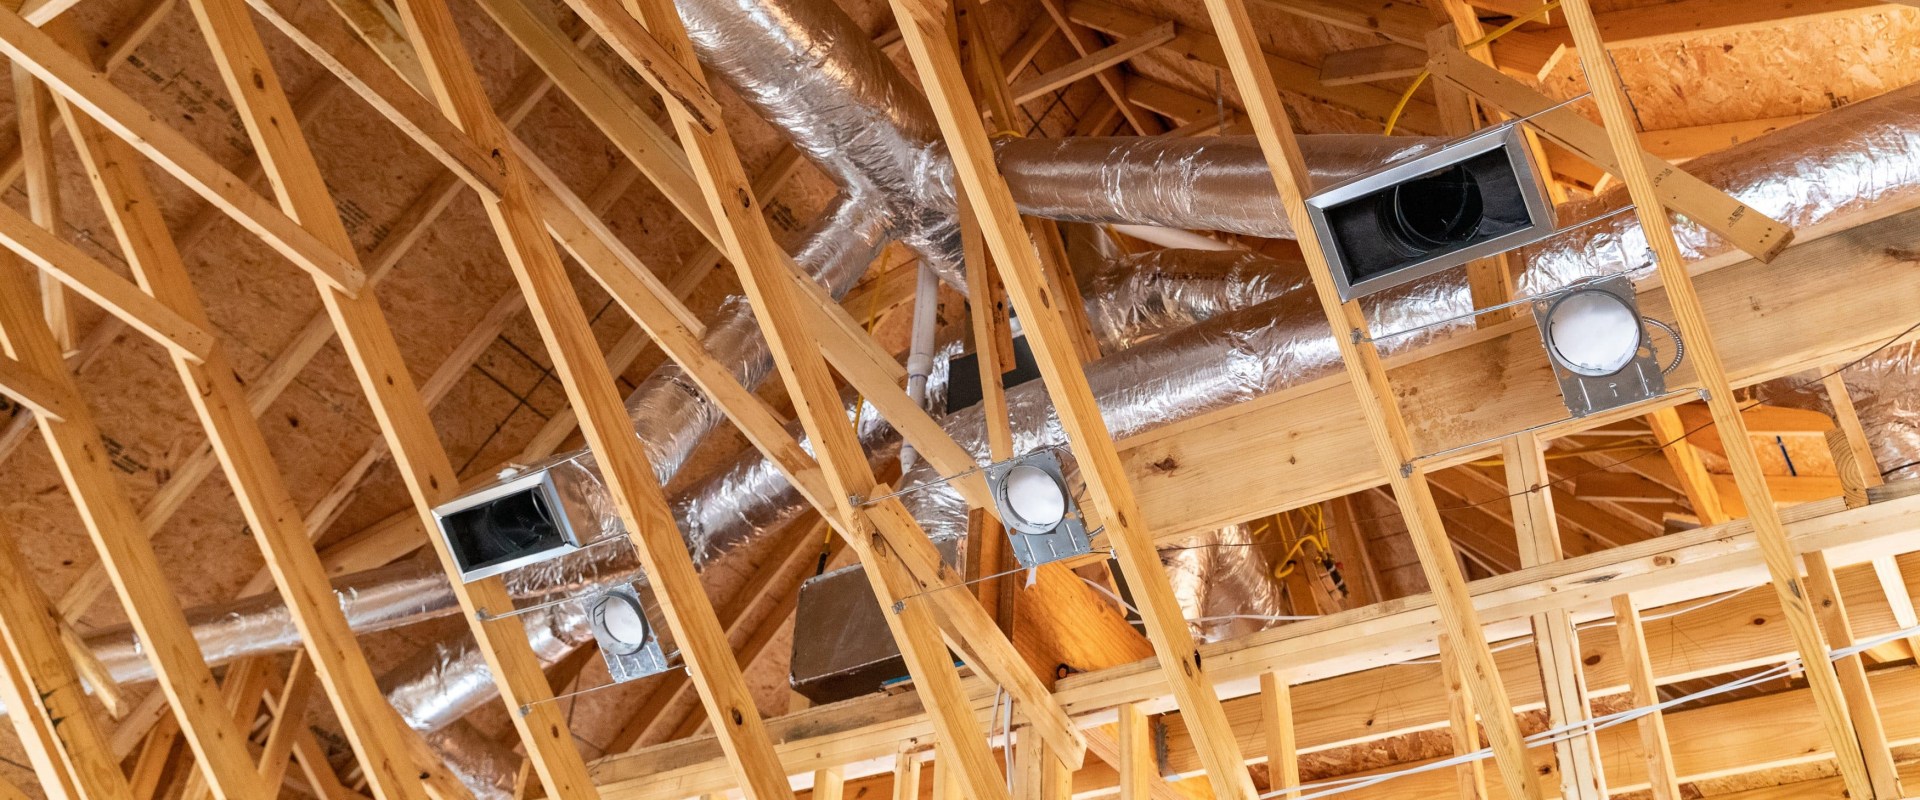 10 Signs Your Home Needs New Ductwork - From an HVAC Expert's Perspective